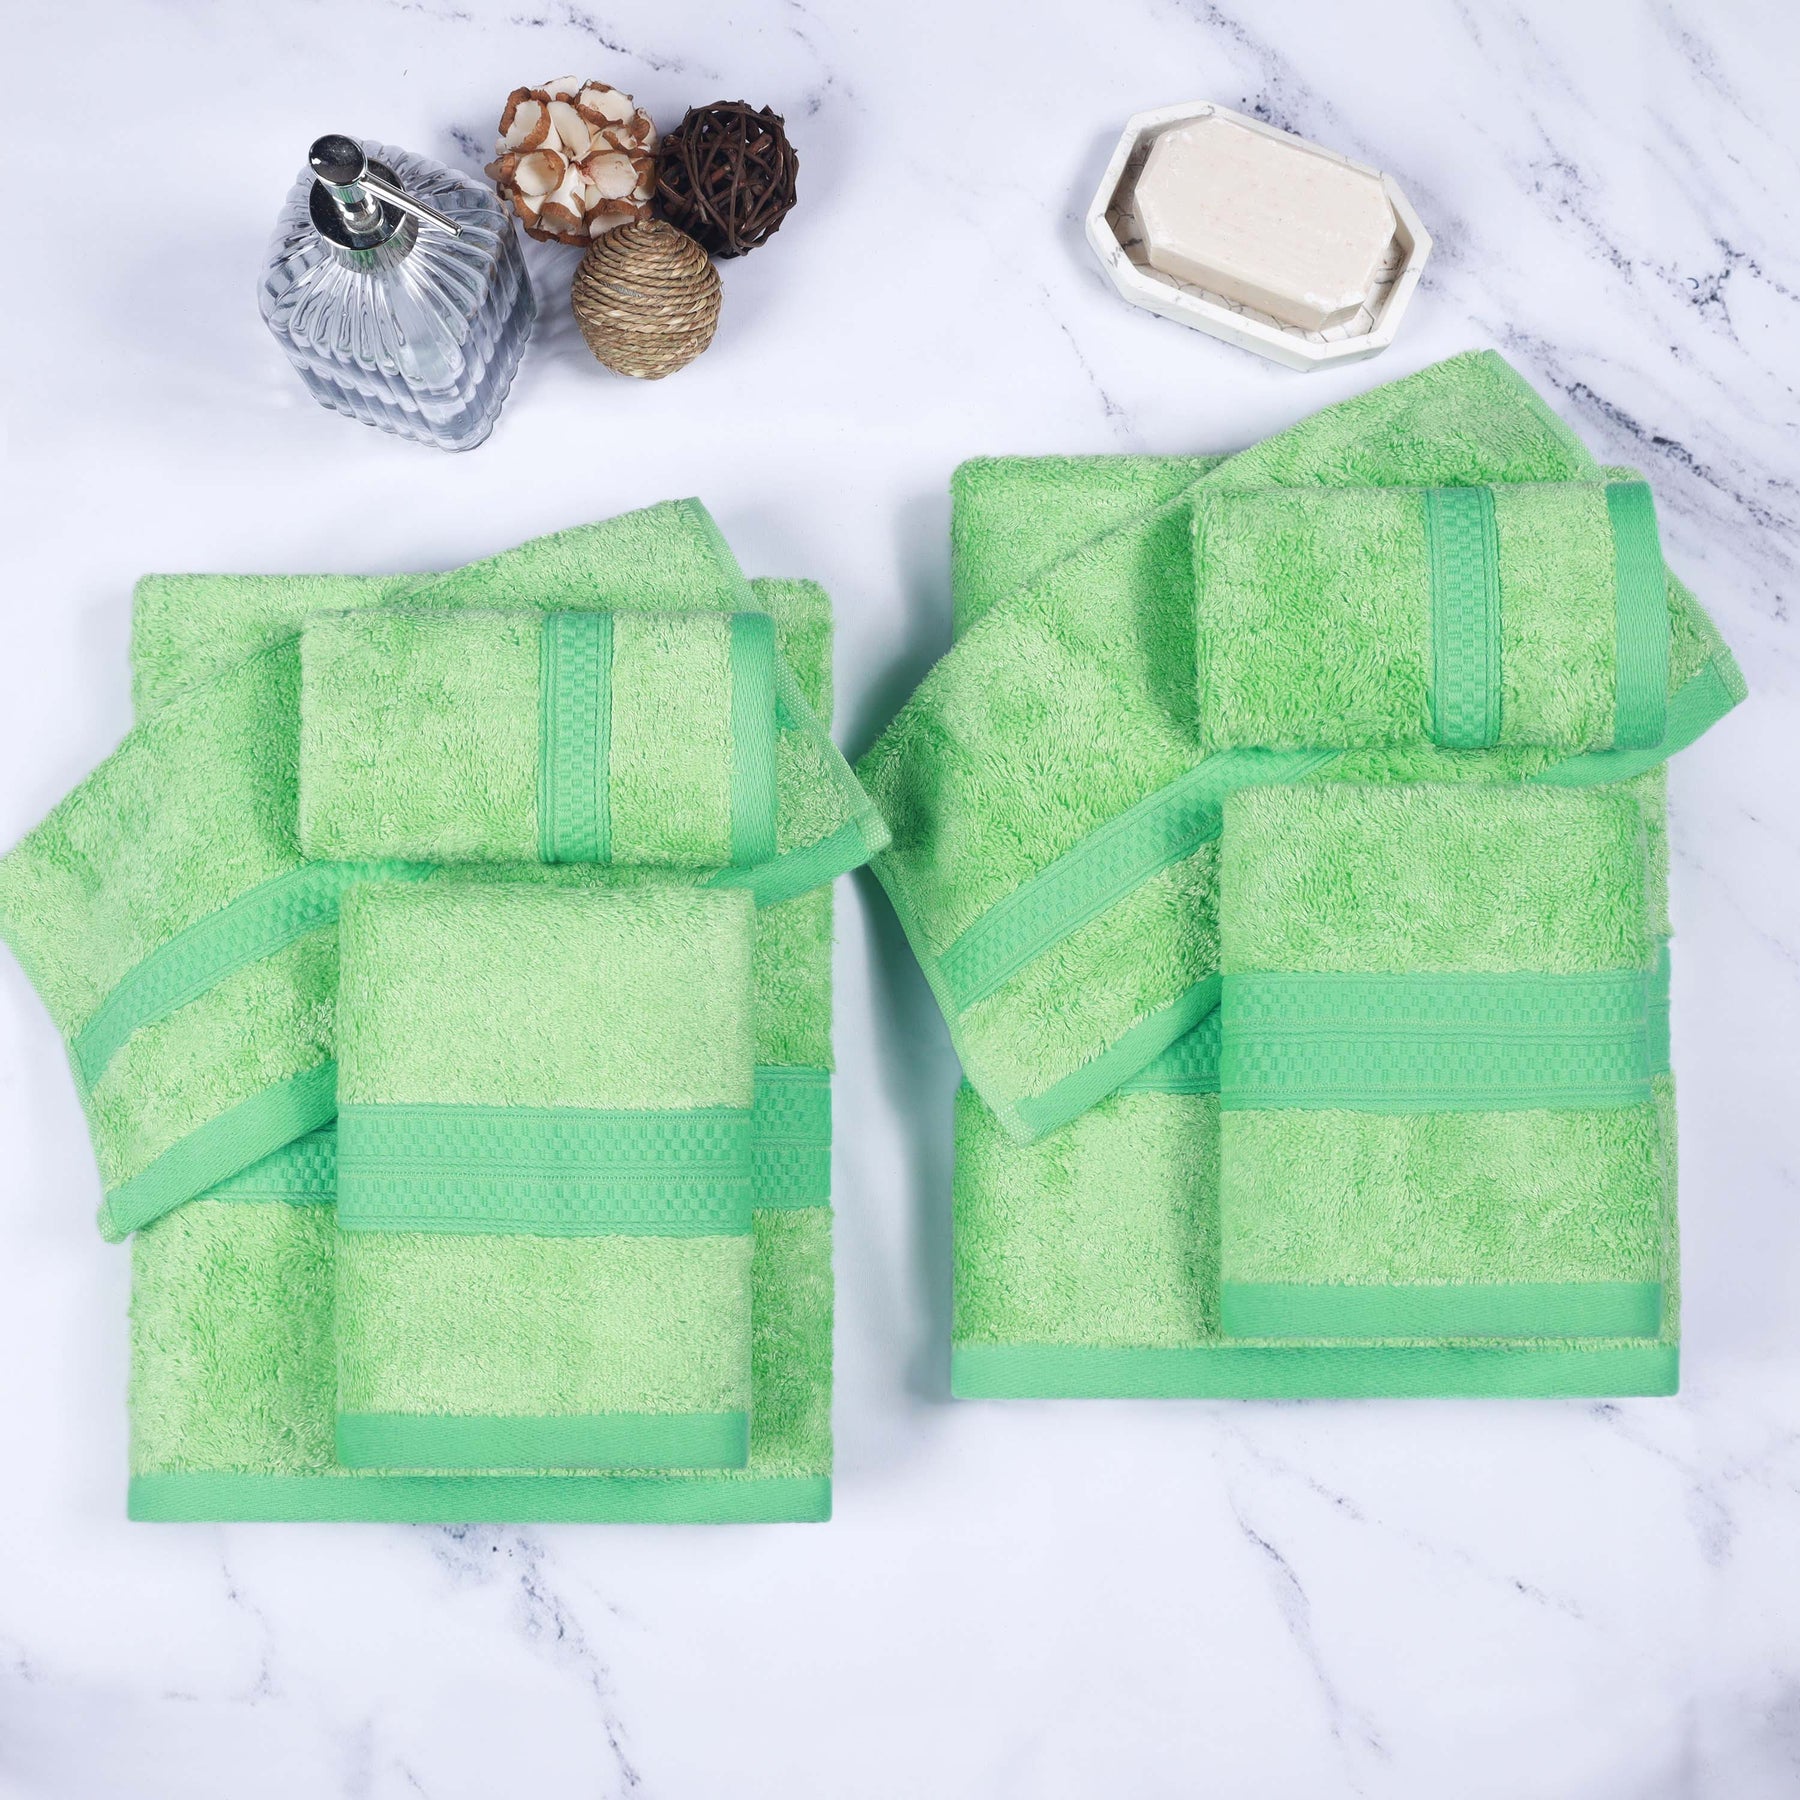 Ultra-Soft Rayon from Bamboo Cotton Blend 8 Piece Towel Set